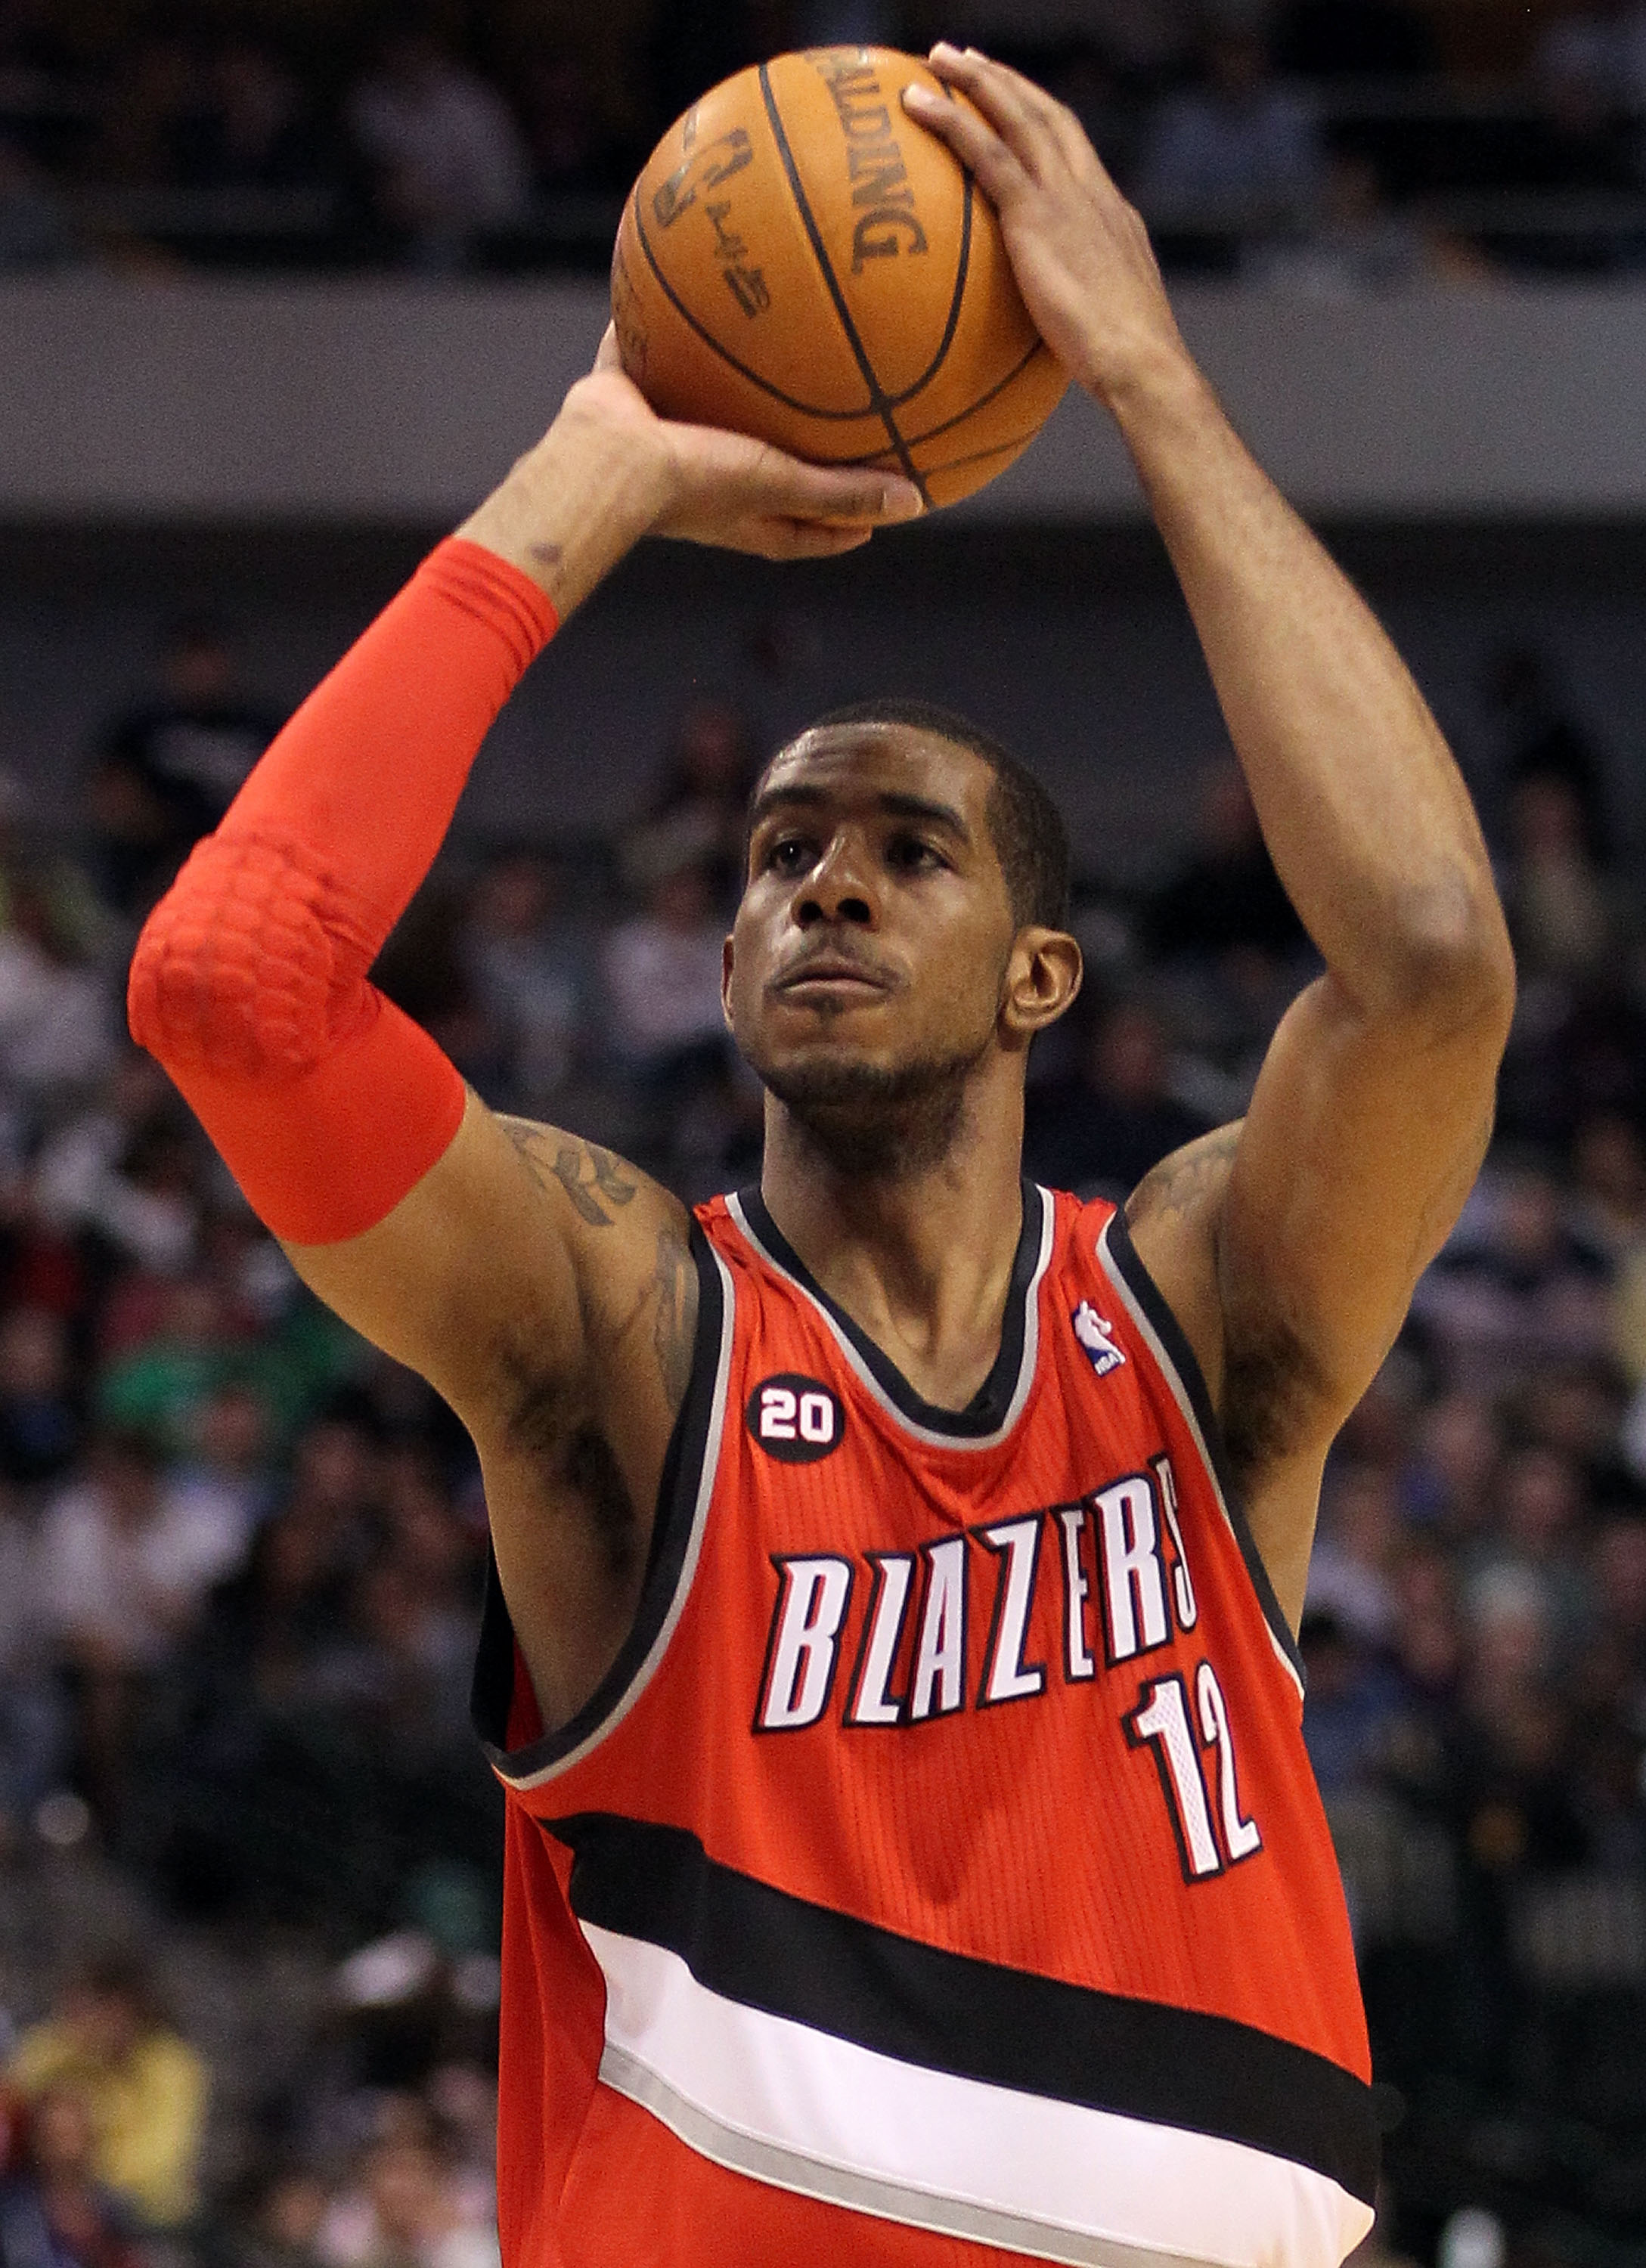 DALLAS, TX - DECEMBER 15:  LaMarcus Aldridge #12 of the Portland Trail Blazers at American Airlines Center on December 15, 2010 in Dallas, Texas. NOTE TO USER: User expressly acknowledges and agrees that, by downloading and or using this photograph, User